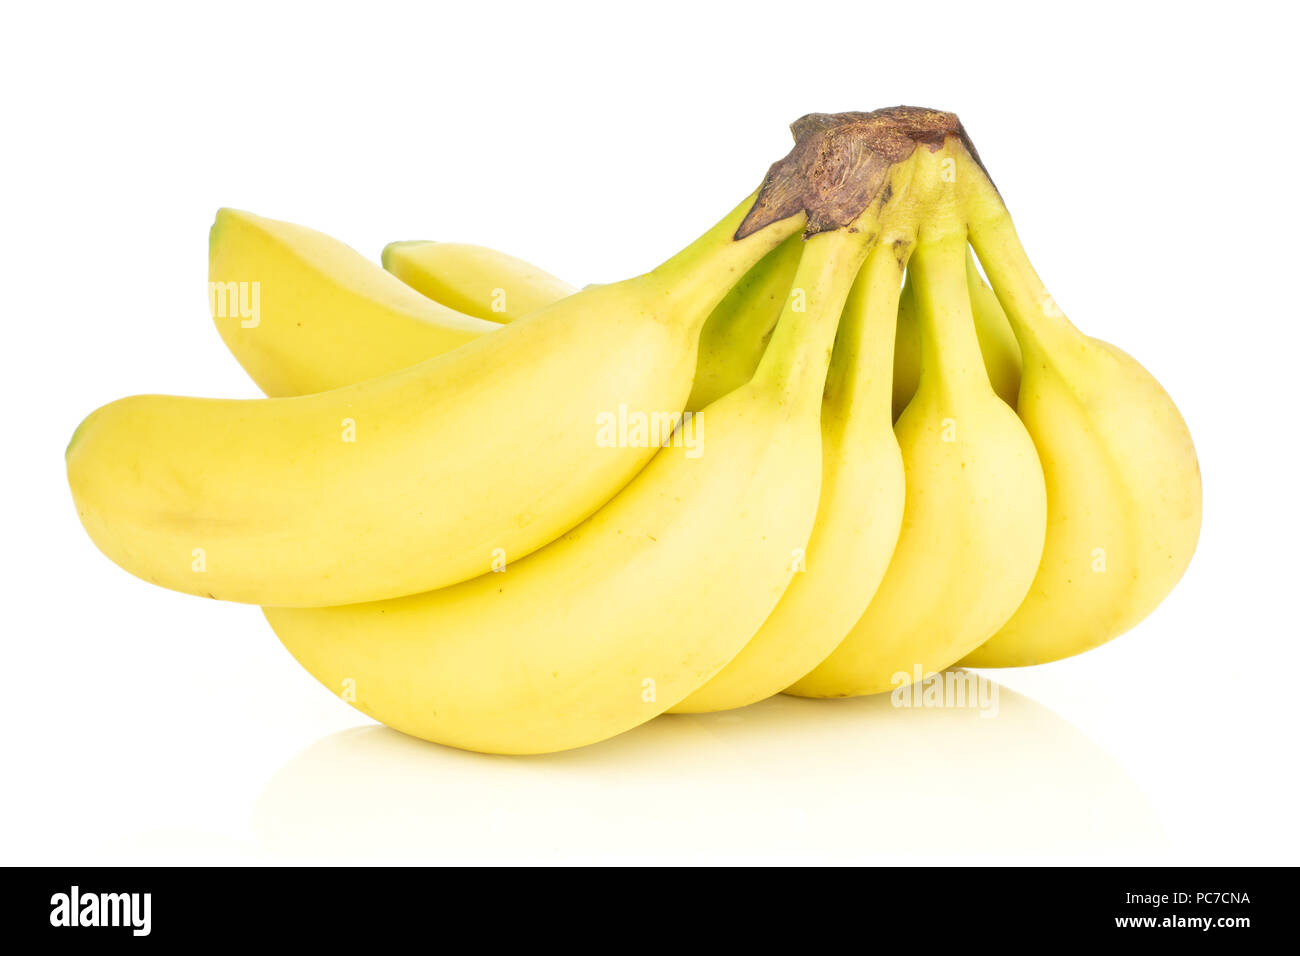 Group of eight whole fresh yellow banana one cluster isolated on white background Stock Photo